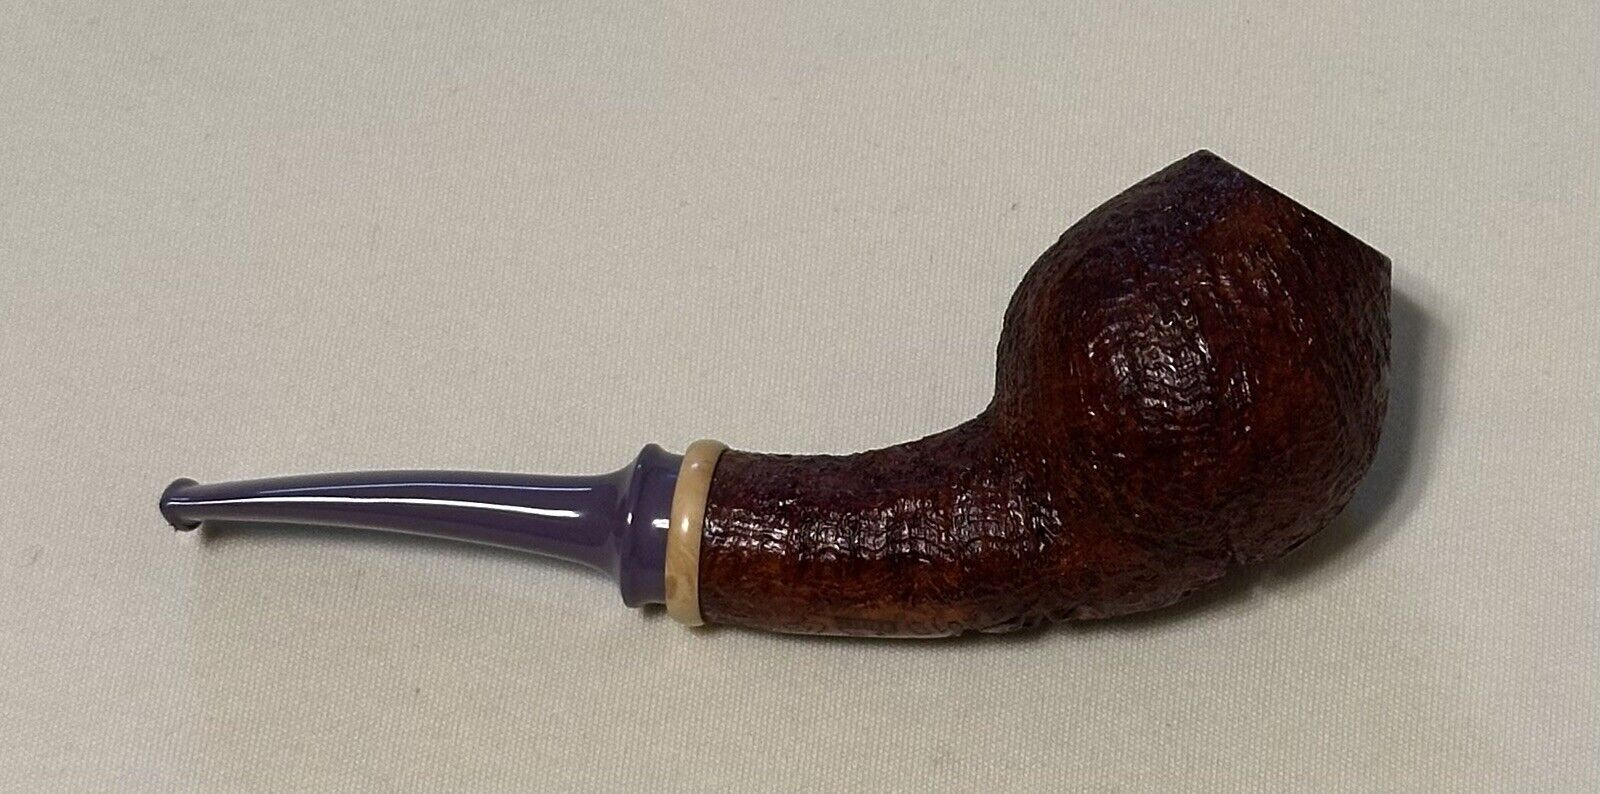 Grant Batson 2019 Pipe, New, Never Smoked, Mint Condition, Place Your Bid Now